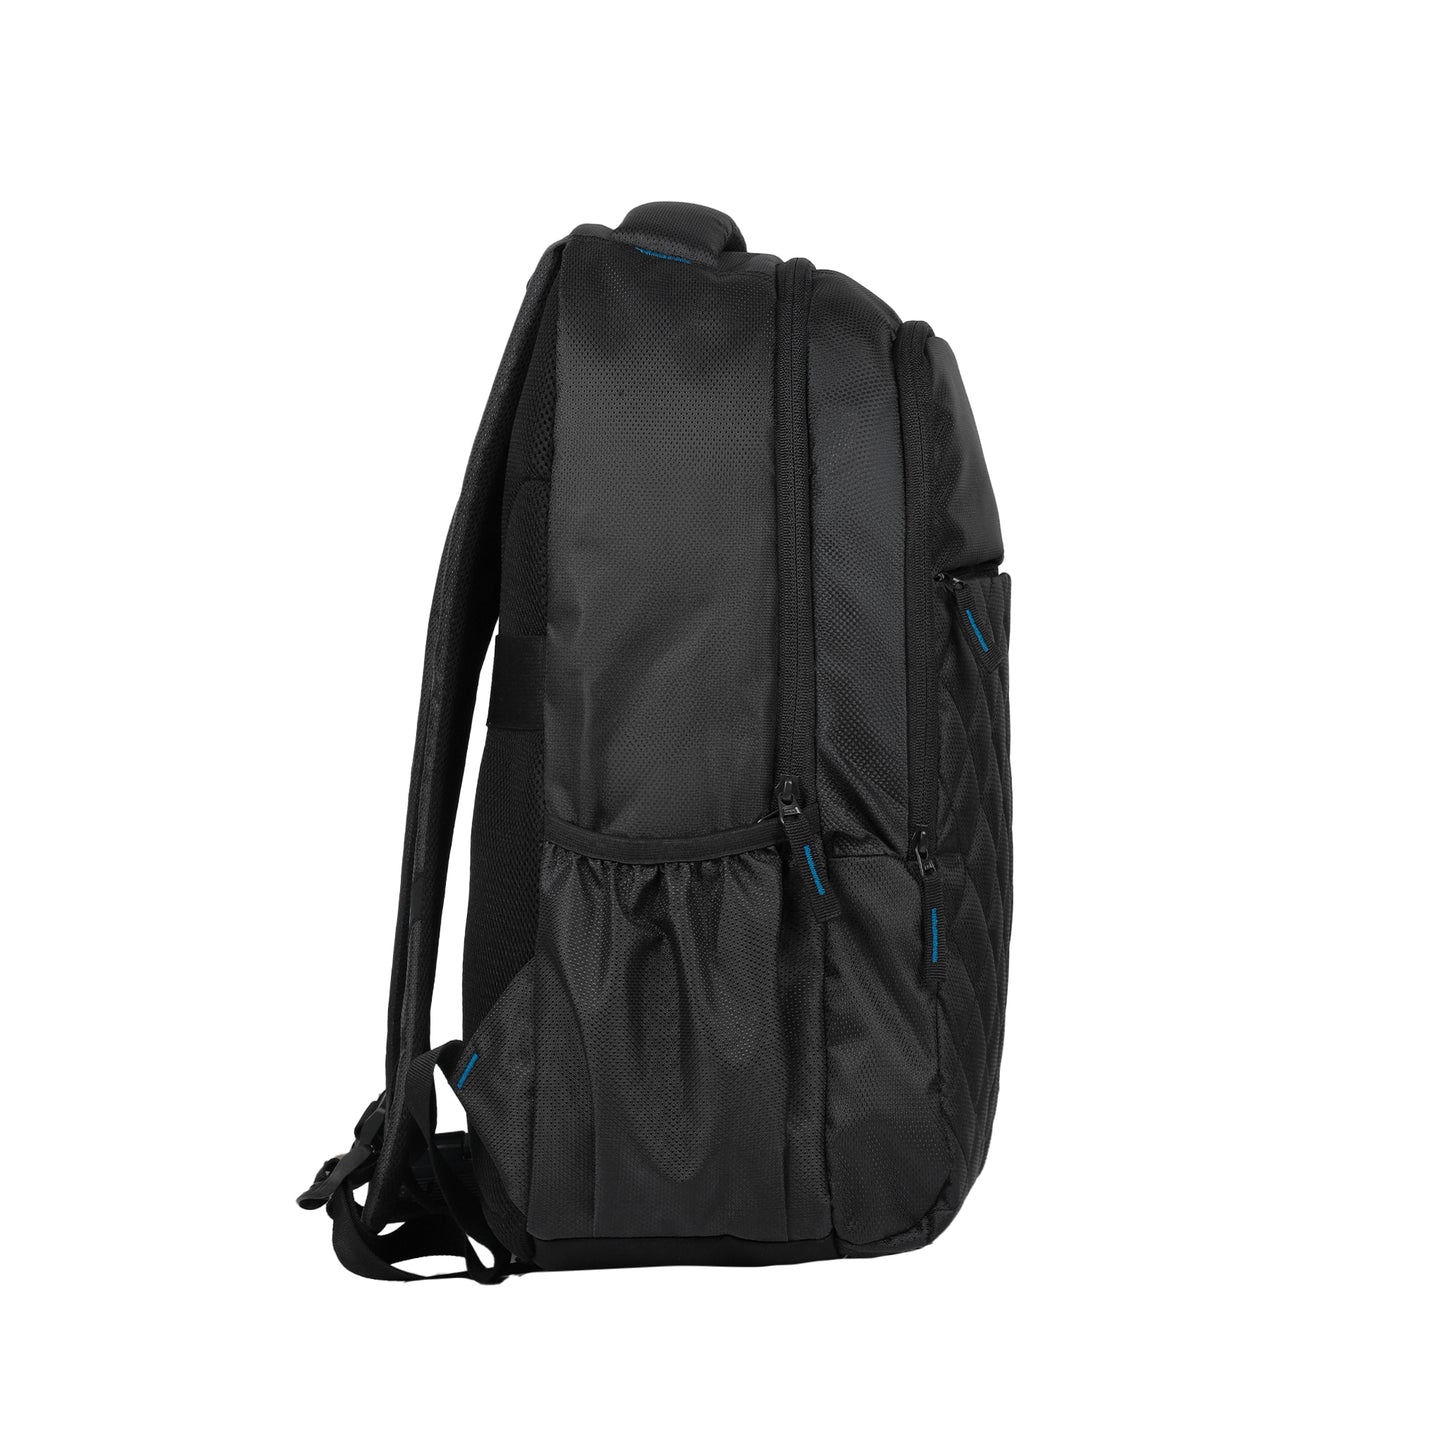 Coach Black 26L Laptop Backpack with Rain Cover